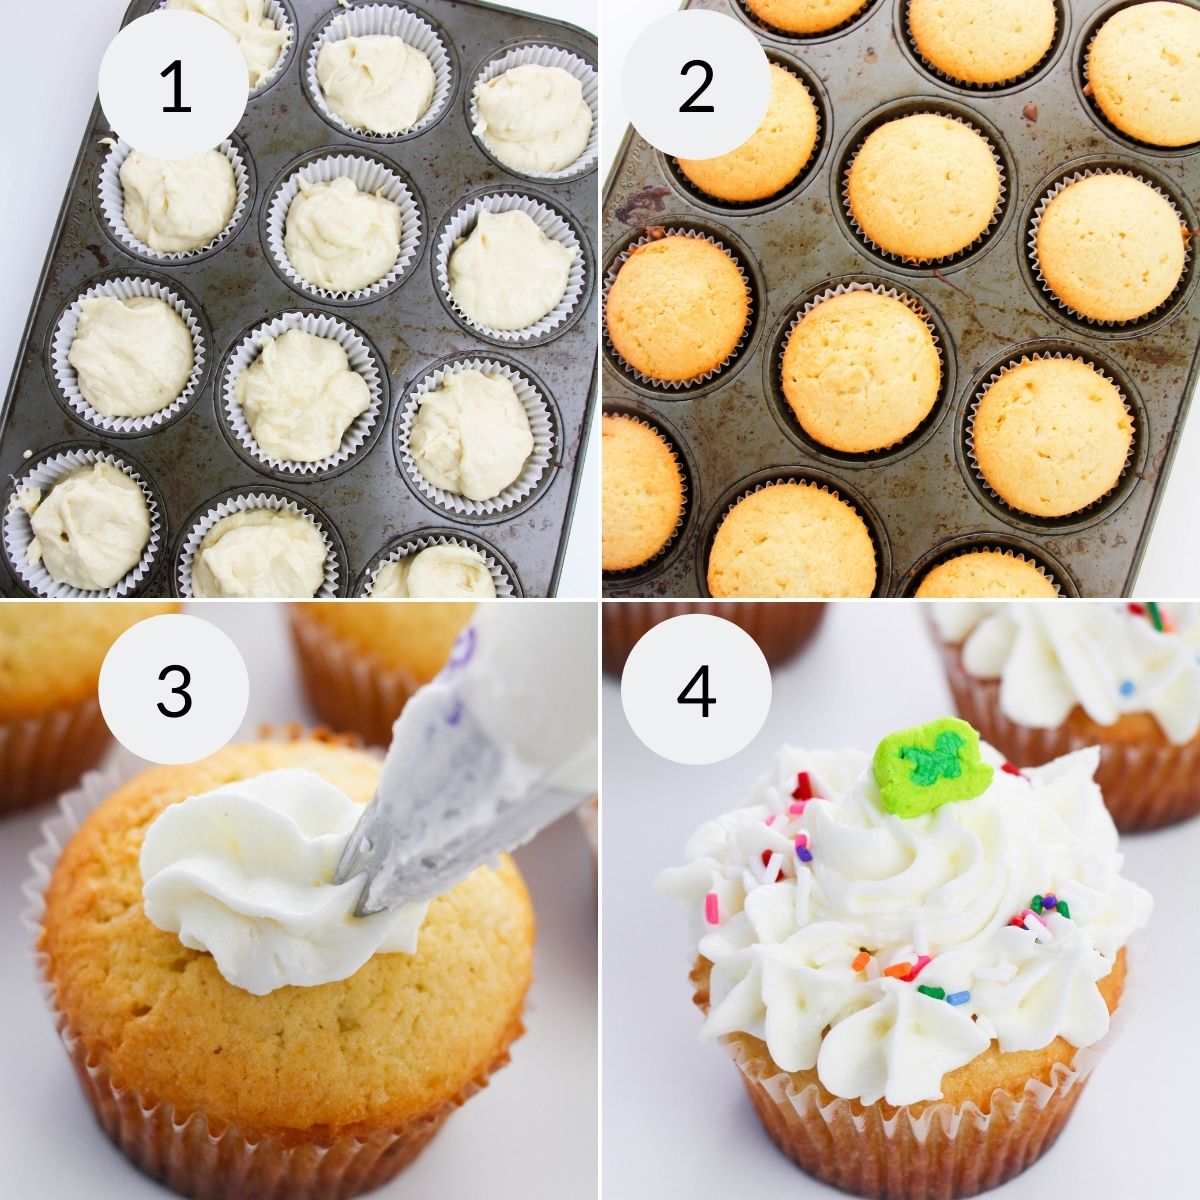 The final cooked cupcakes before and after icing and decorating.